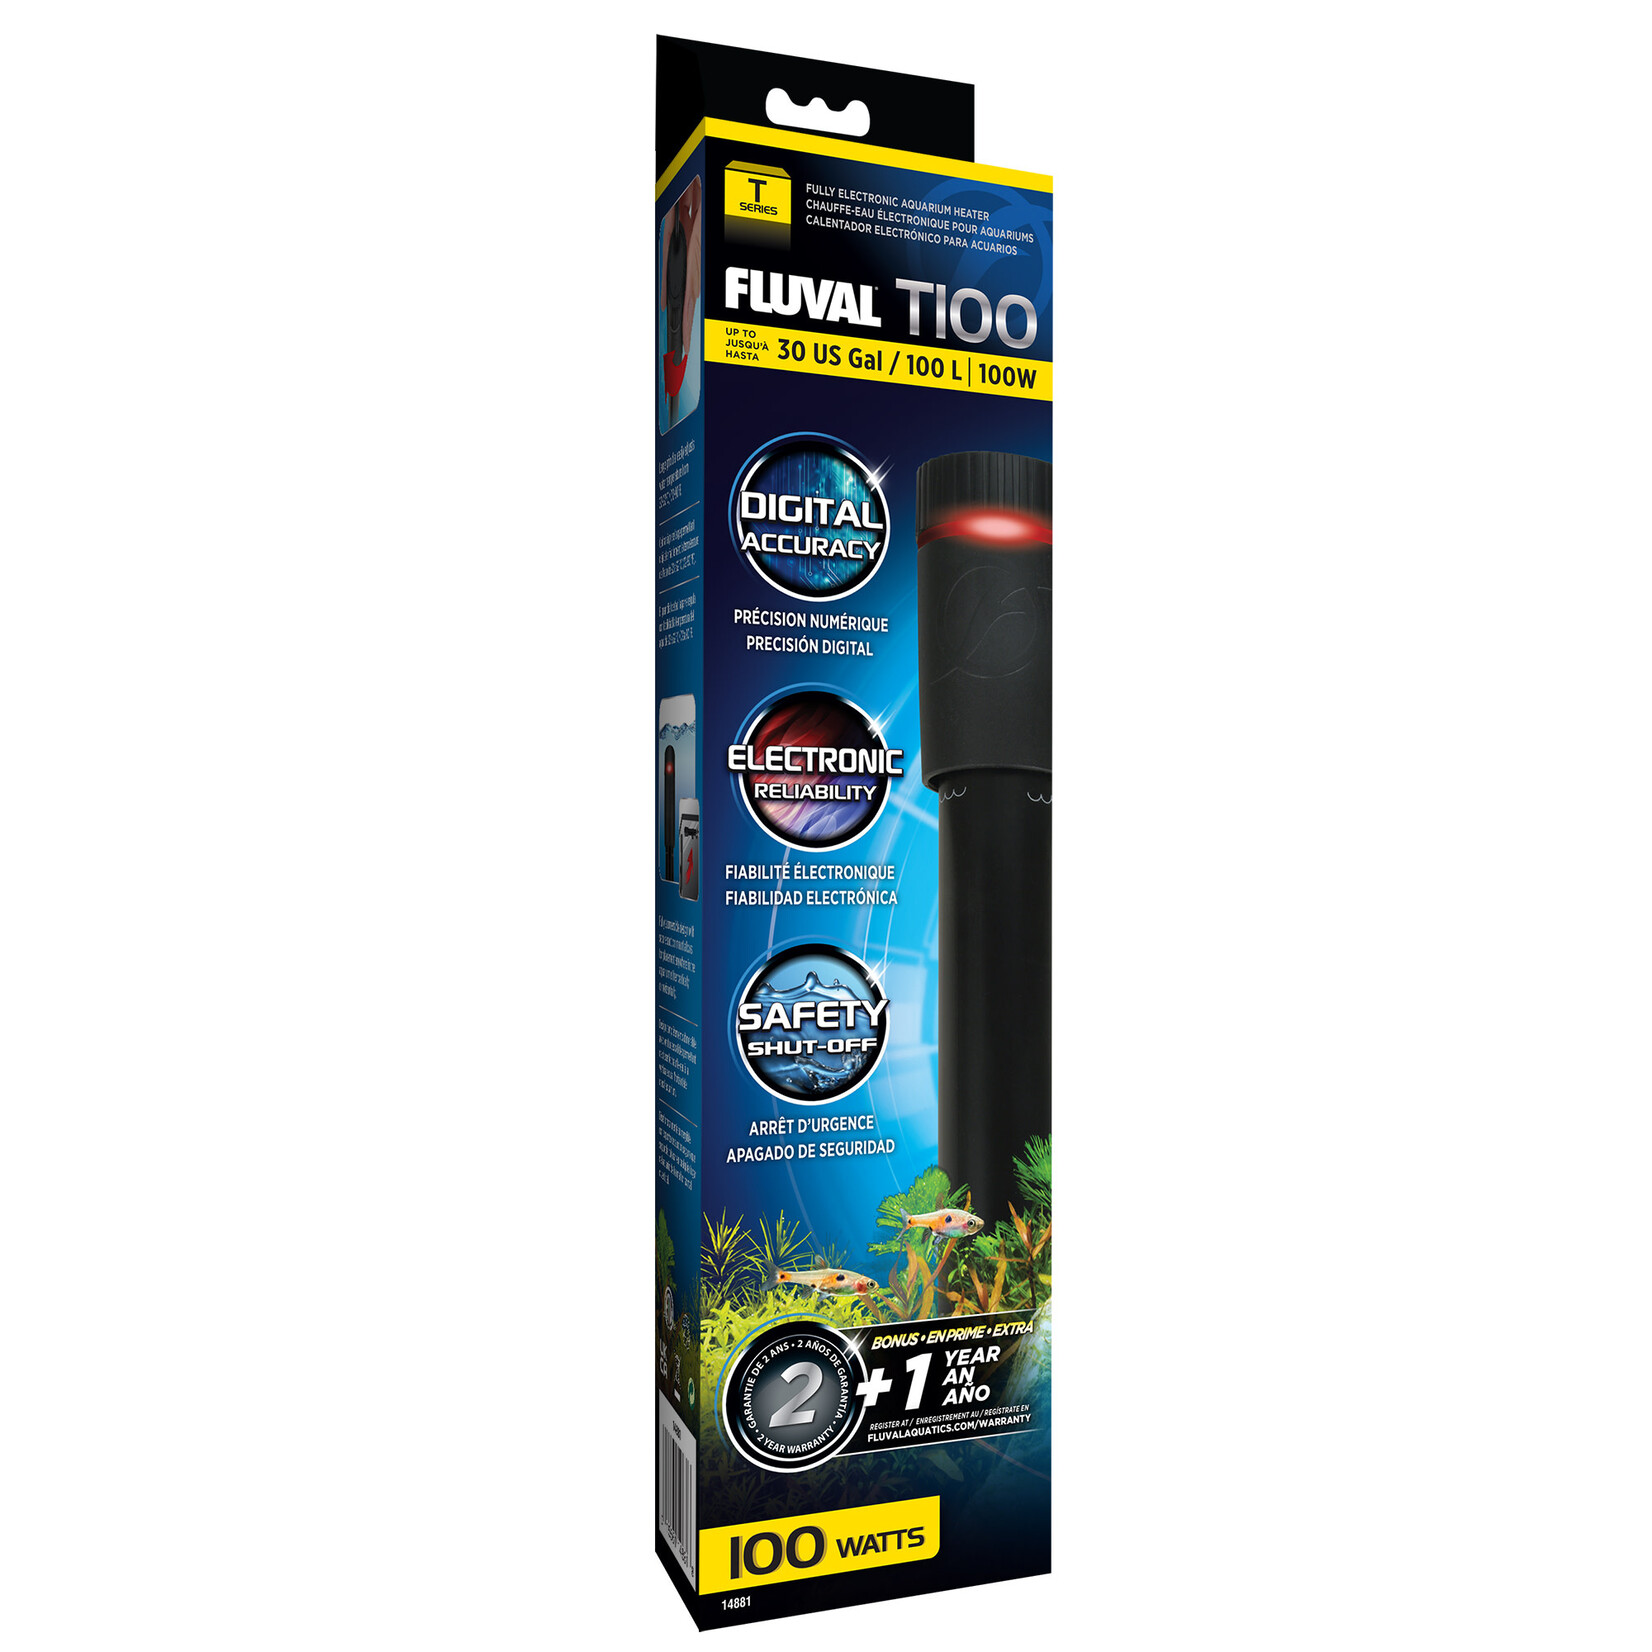 FLUVAL Fluval T100 Heater - 100W - up to 100L (30 US Gal)